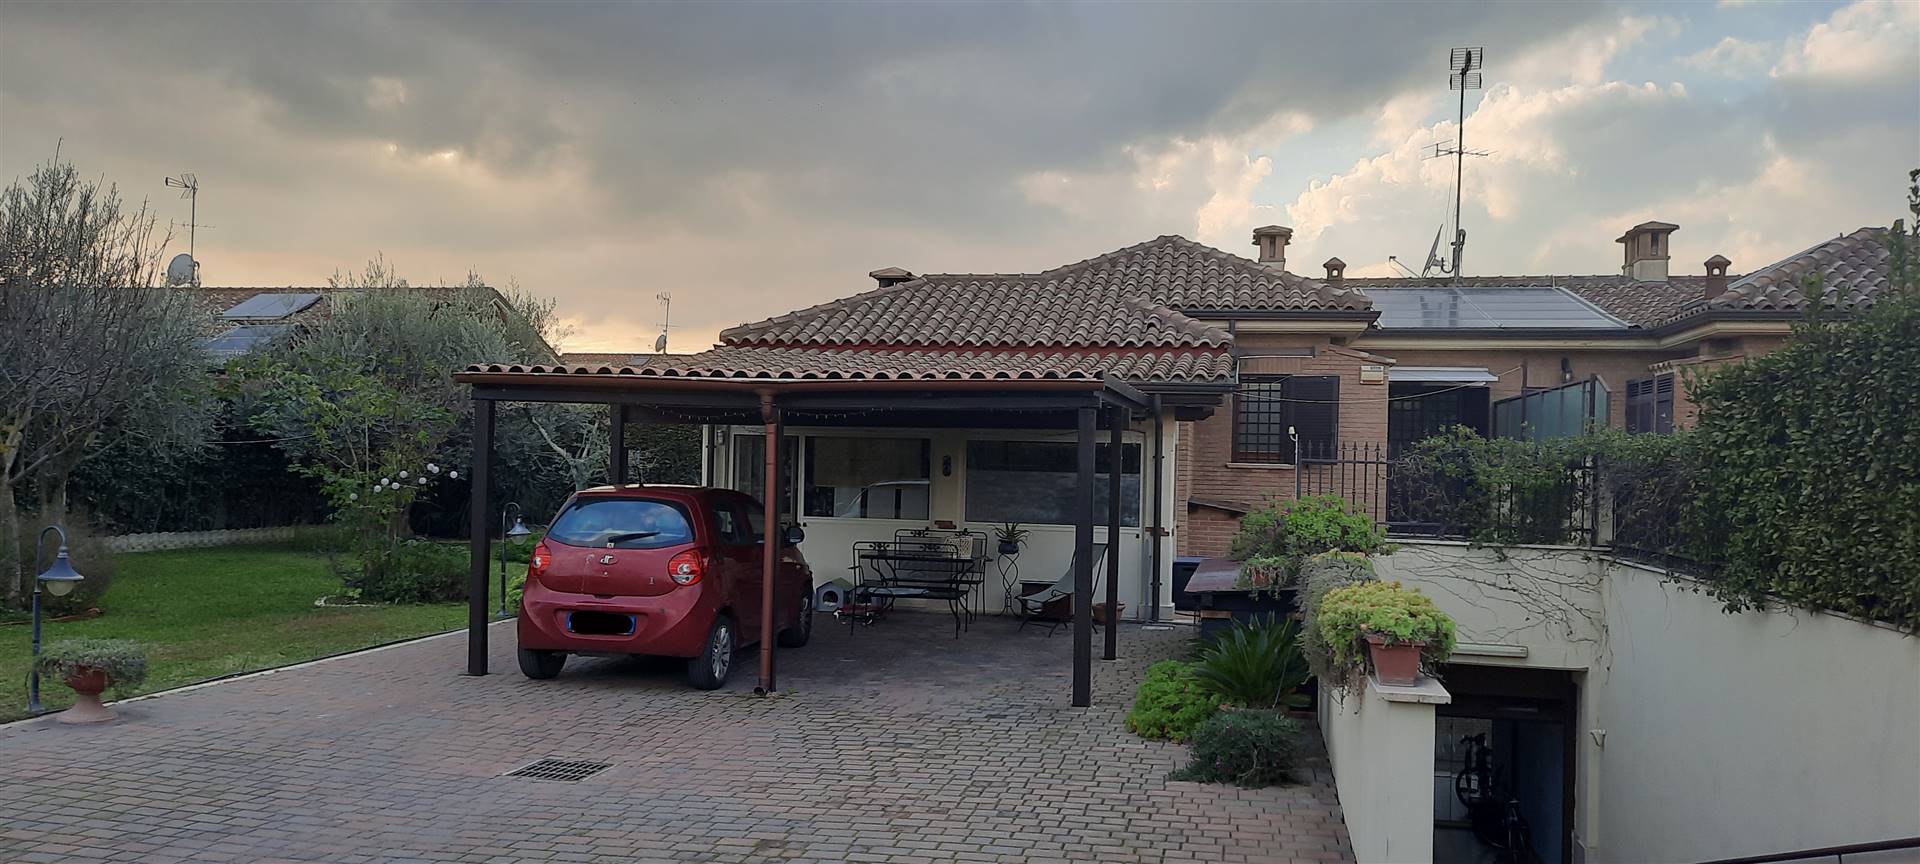 FRATTOCCHIE, MARINO, Villa for sale of 80 Sq. mt., Excellent Condition, Heating Individual heating system, Energetic class: G, Epi: 175 kwh/m2 year, 